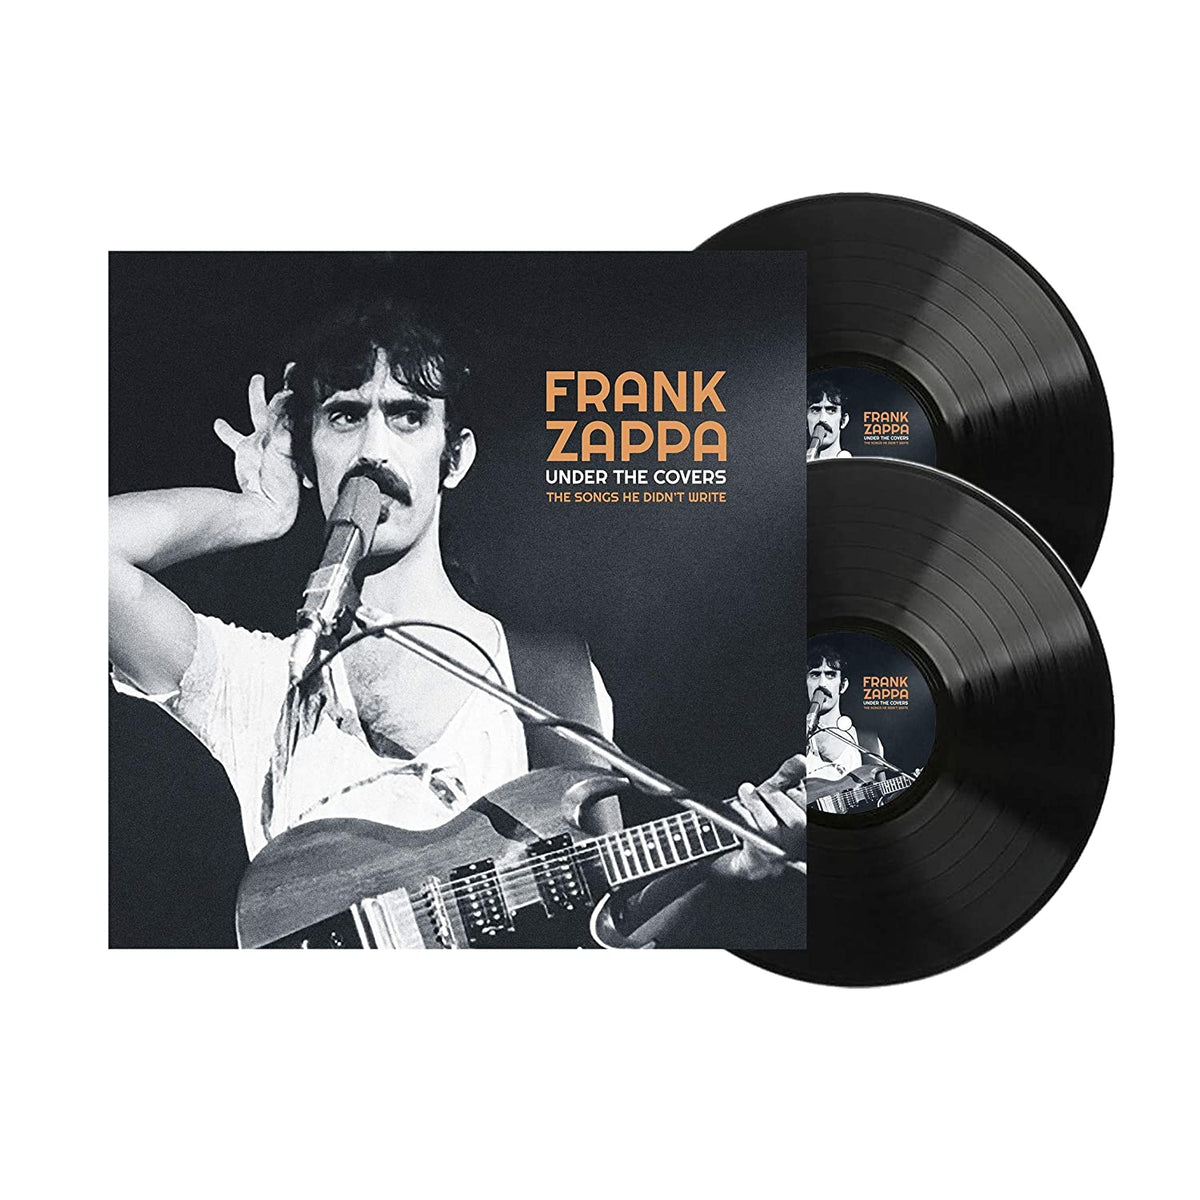 FRANK ZAPPA - Under The Covers: The Songs He Didn't Write -  2 Vinyl Set